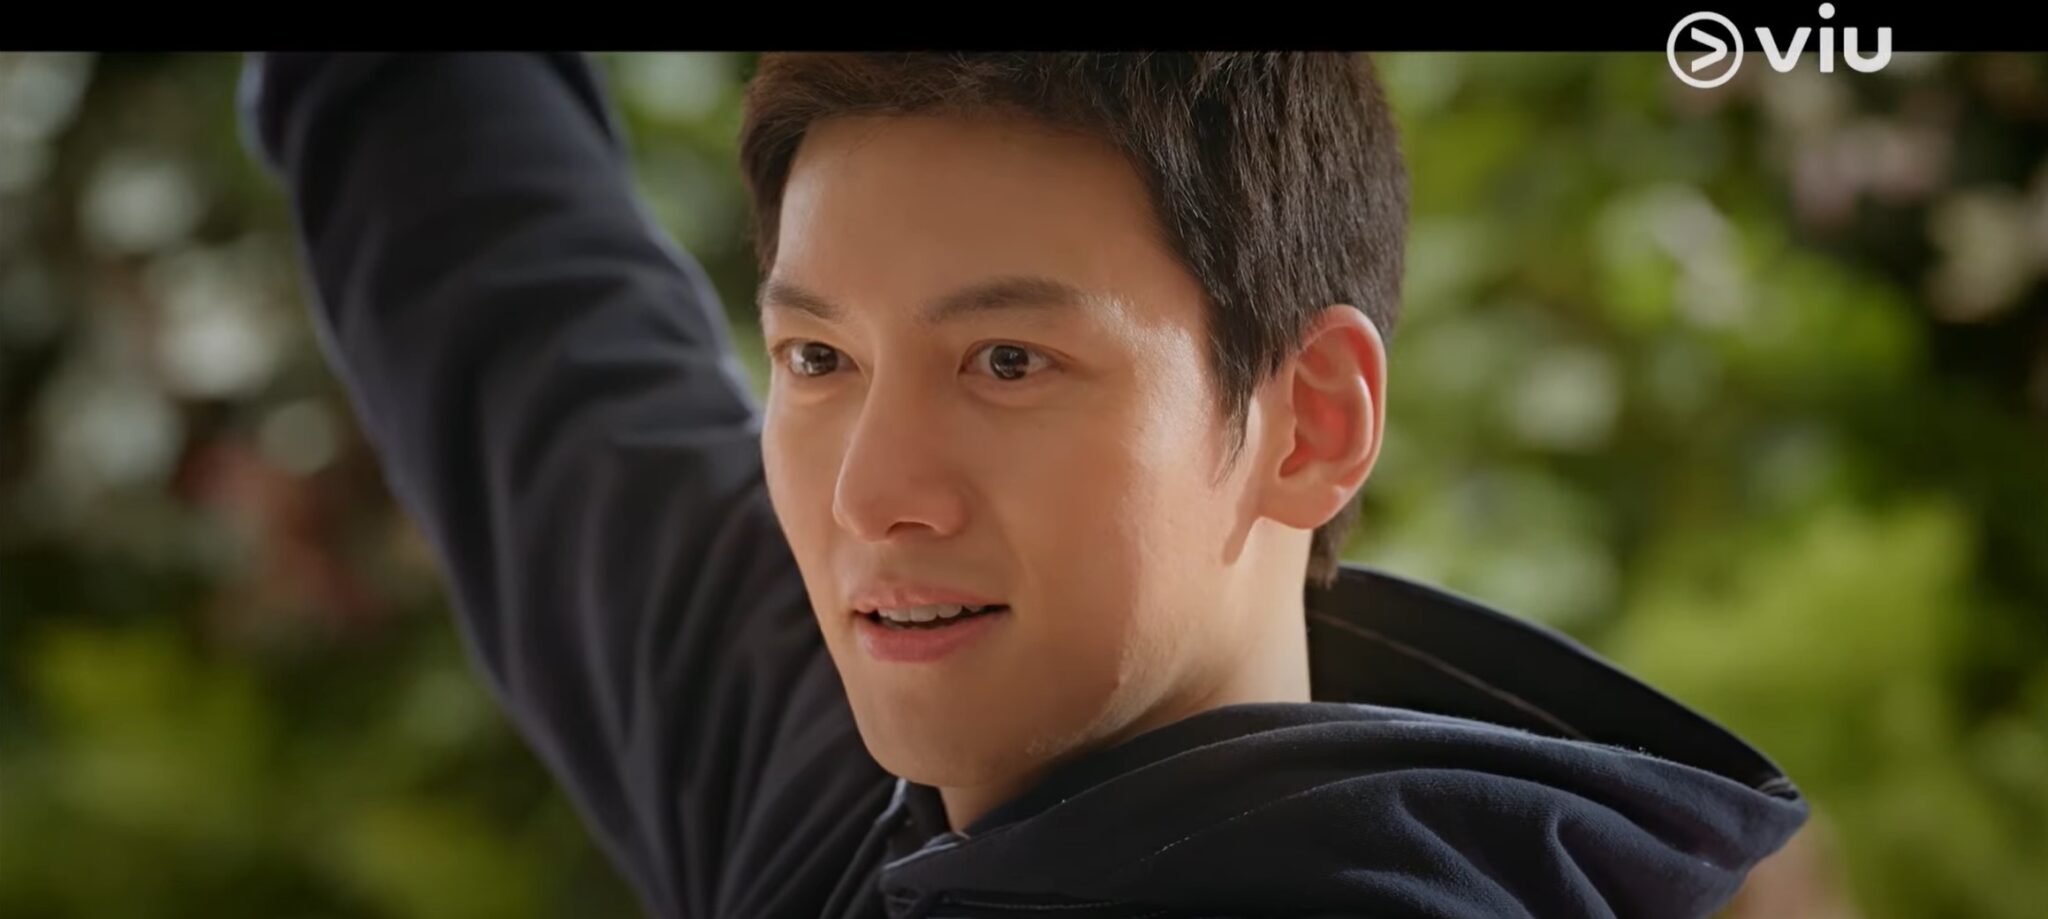 Ji Chang-wook, Sooyoung, and Sung Dong-il make wishes come true in new promos